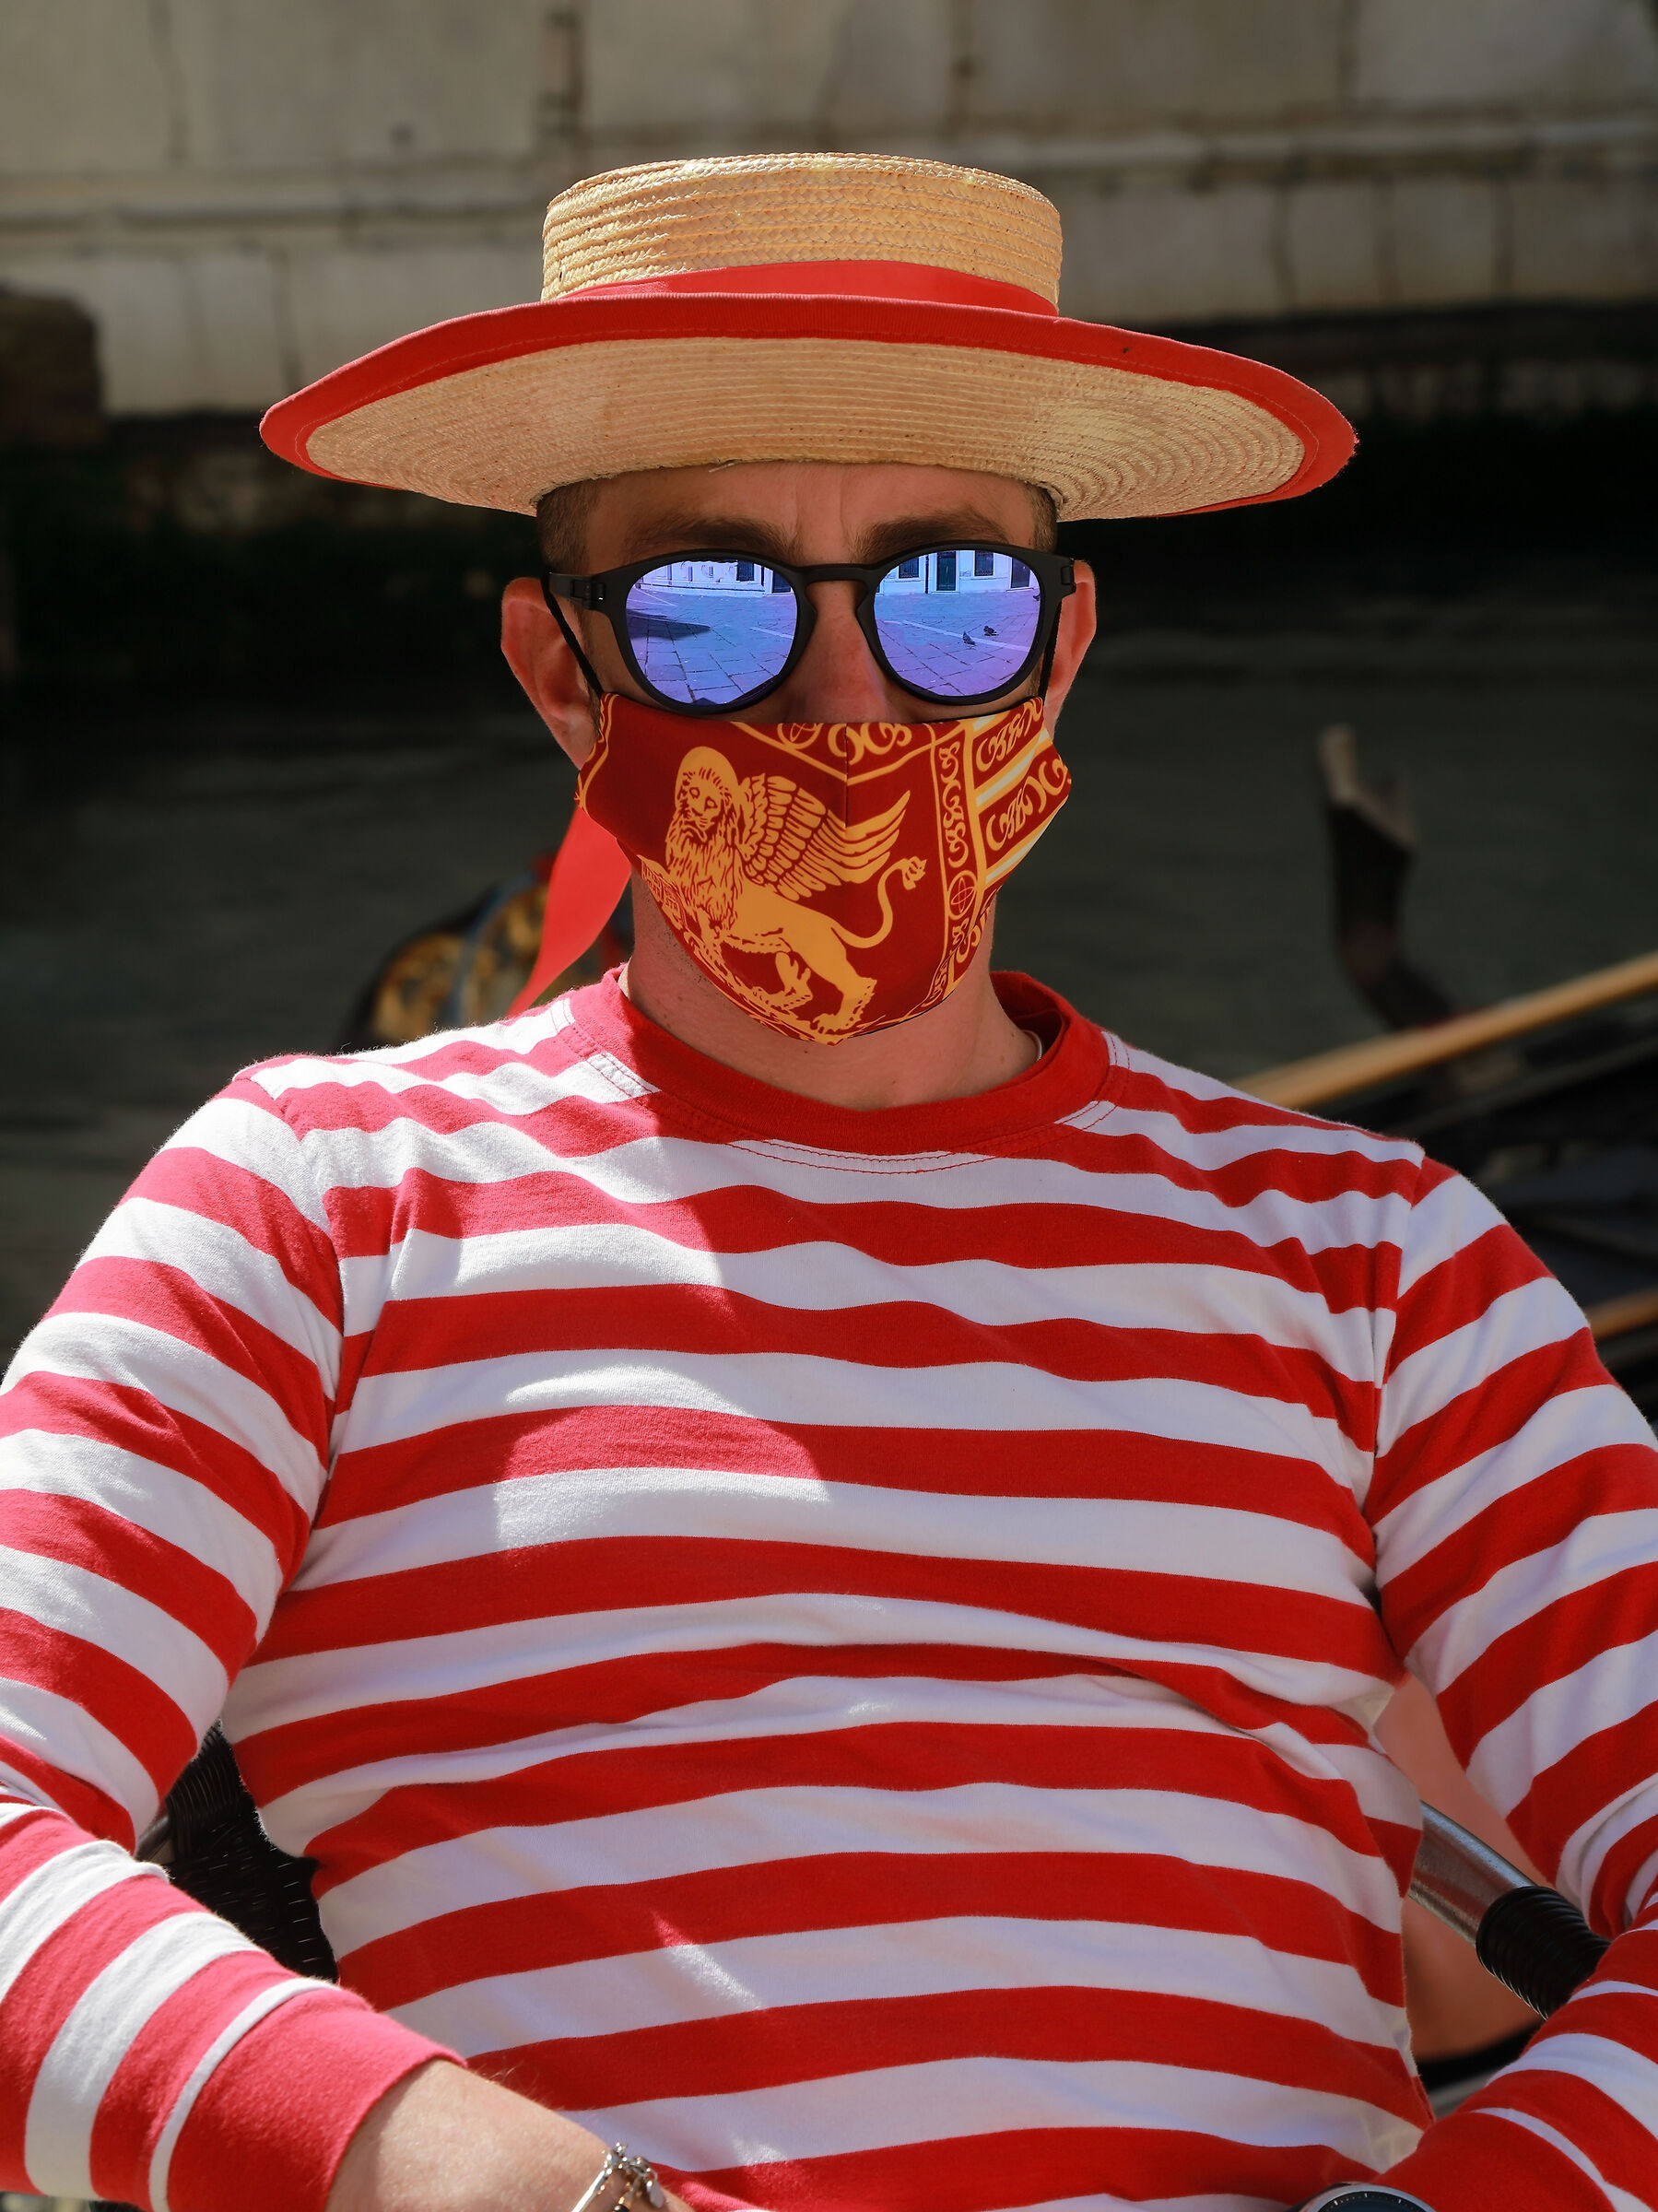 The gondolier of the pandemic era...